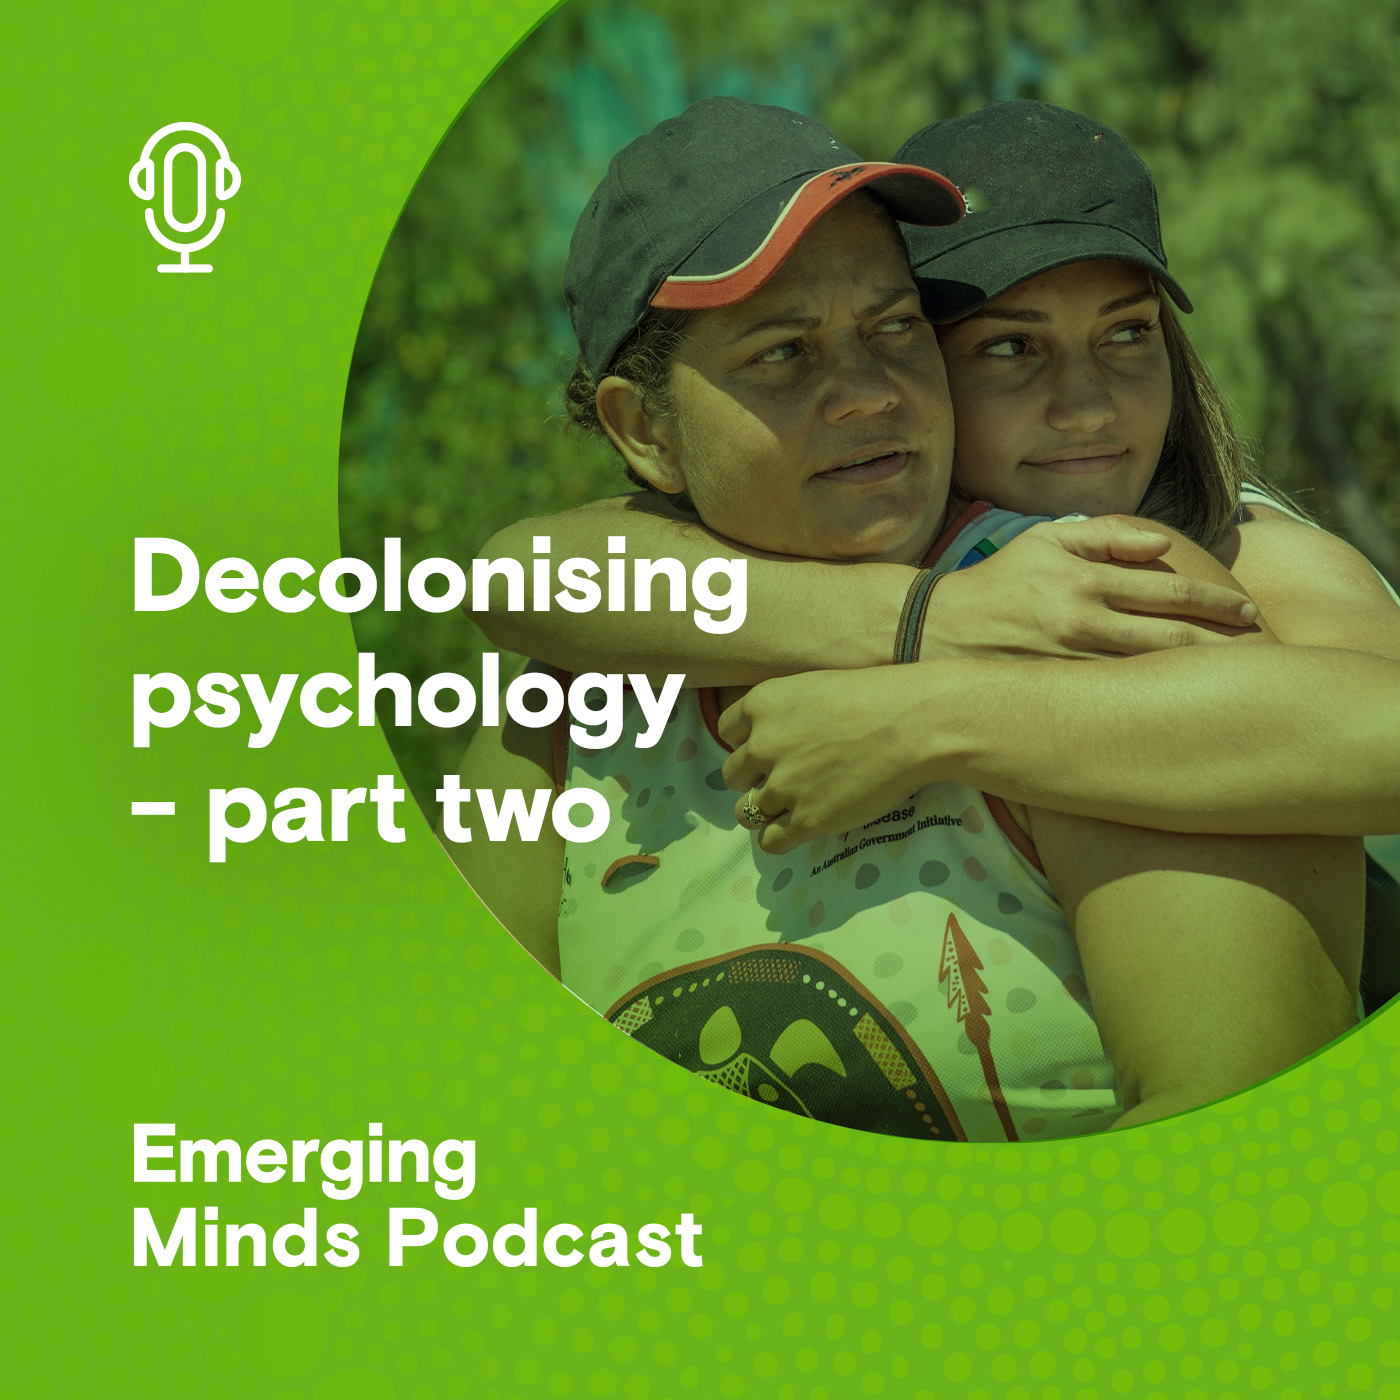 Decolonising psychology - part two